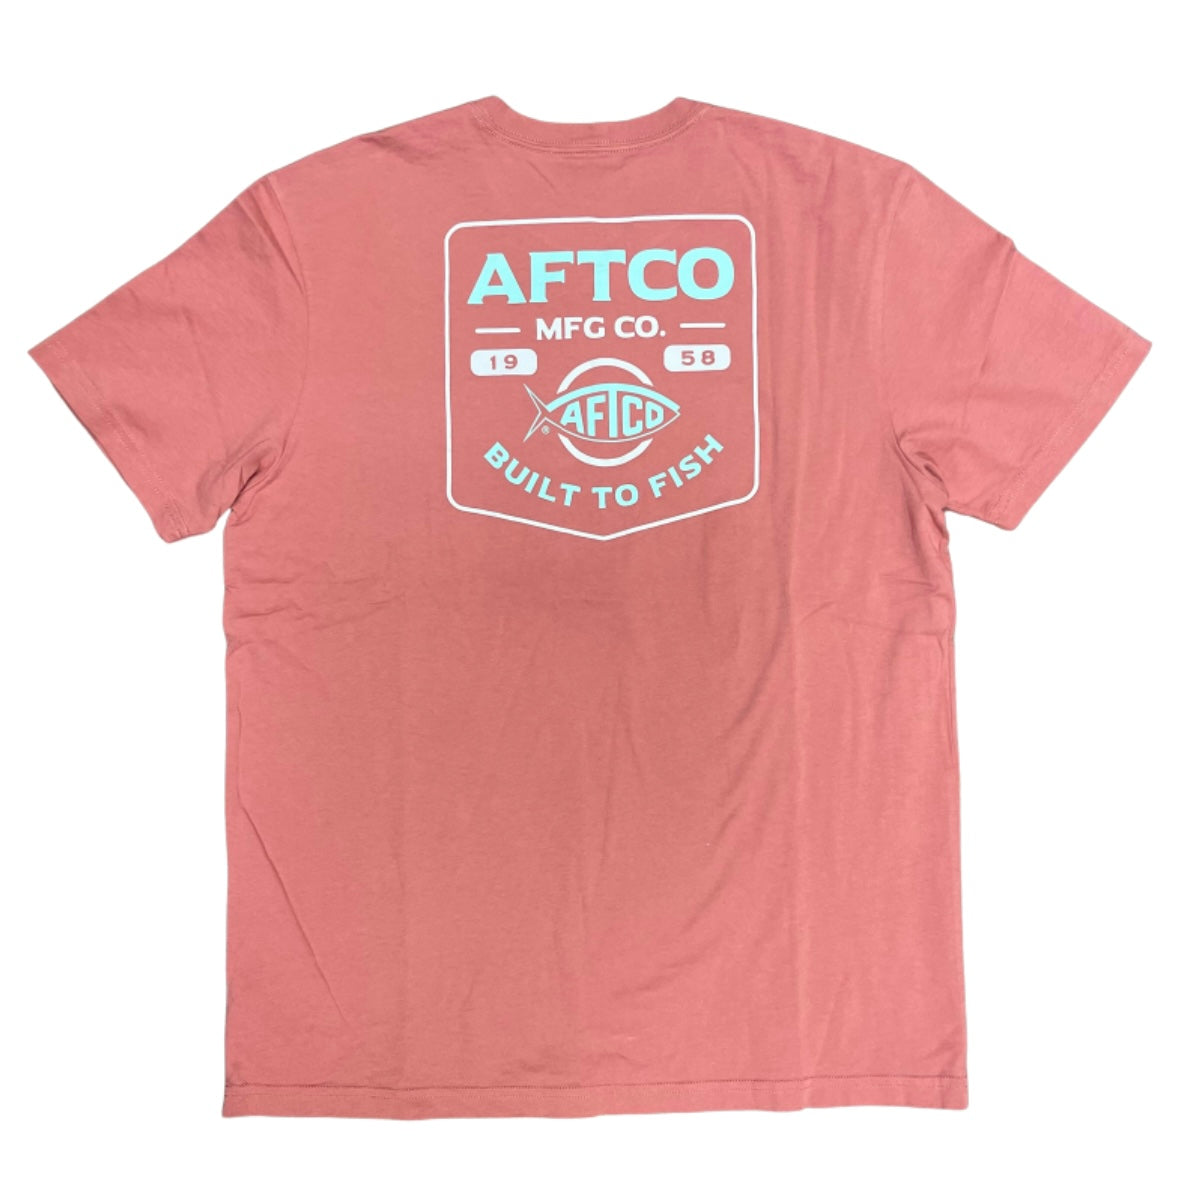 Aftco Certified SS Tee – Commerce Street Clothing